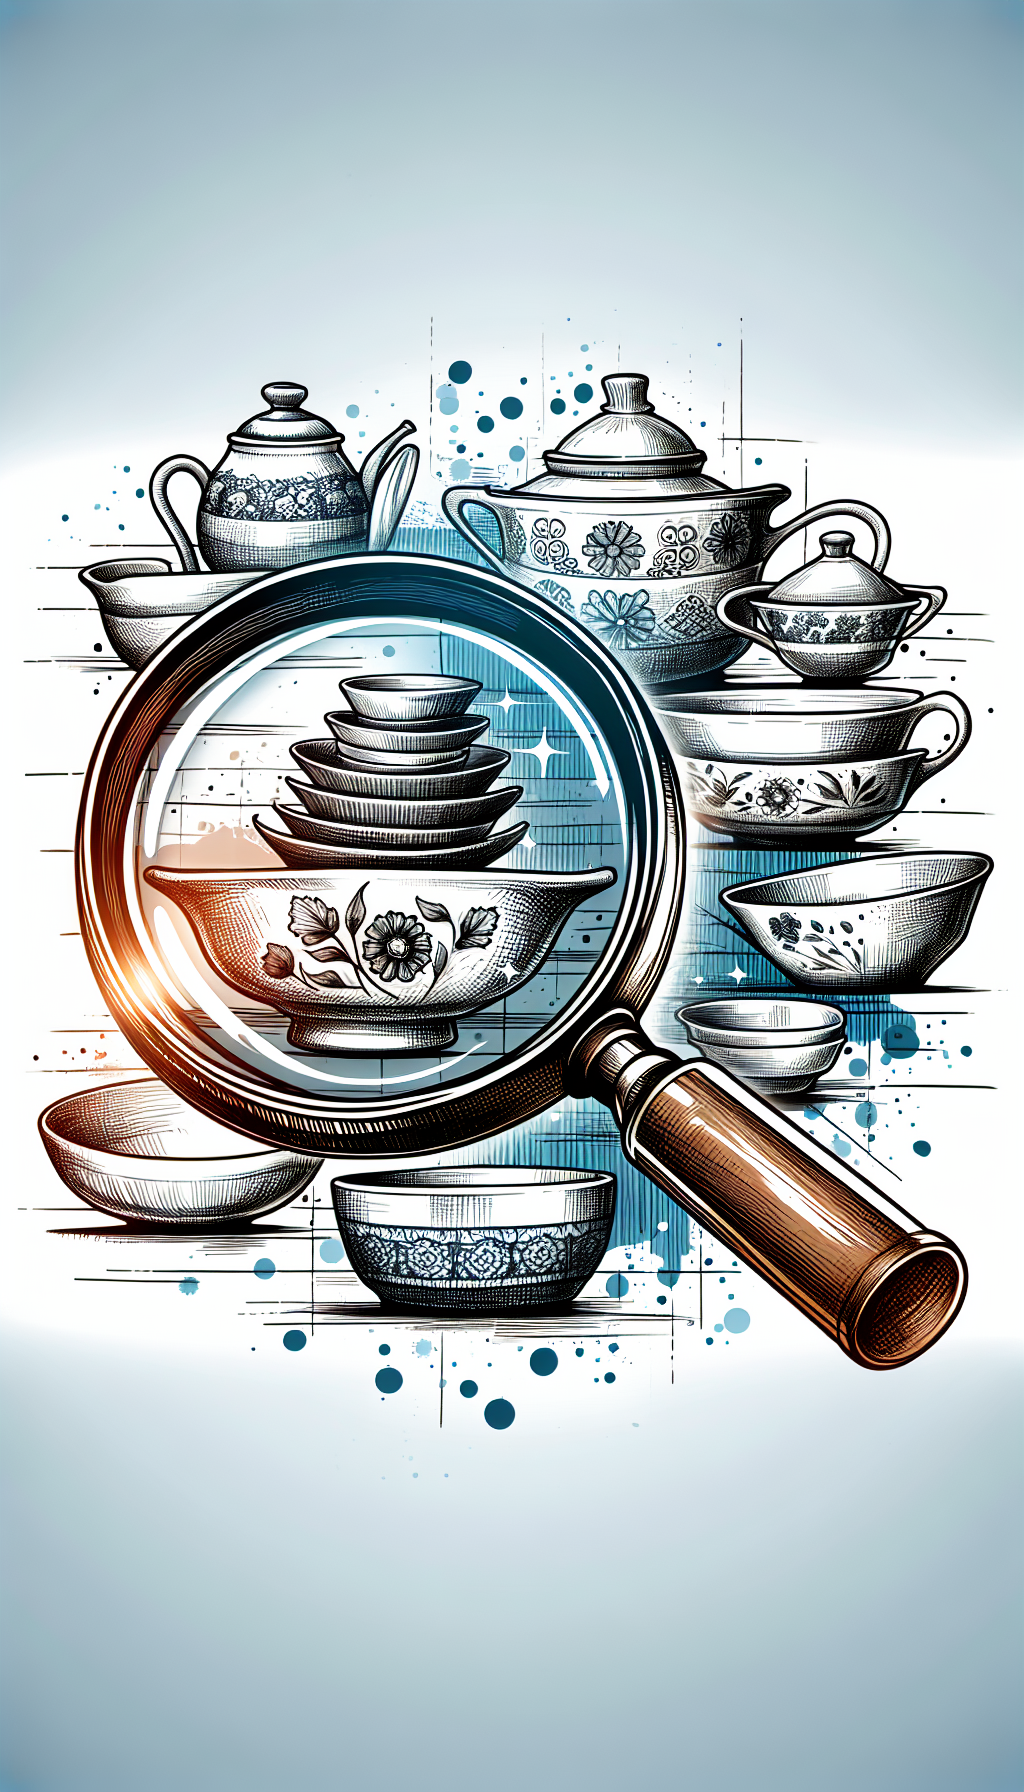 An illustration depicts a magnifying glass hovering over a patchwork of CorningWare dishes, each adorned with different vintage patterns. Select pieces shimmer with a subtle glow, hinting at their rarity. The background is a playful mix of sketch lines and watercolor splashes, symbolizing the thrill of discovery in the diverse world of CorningWare collectibles.